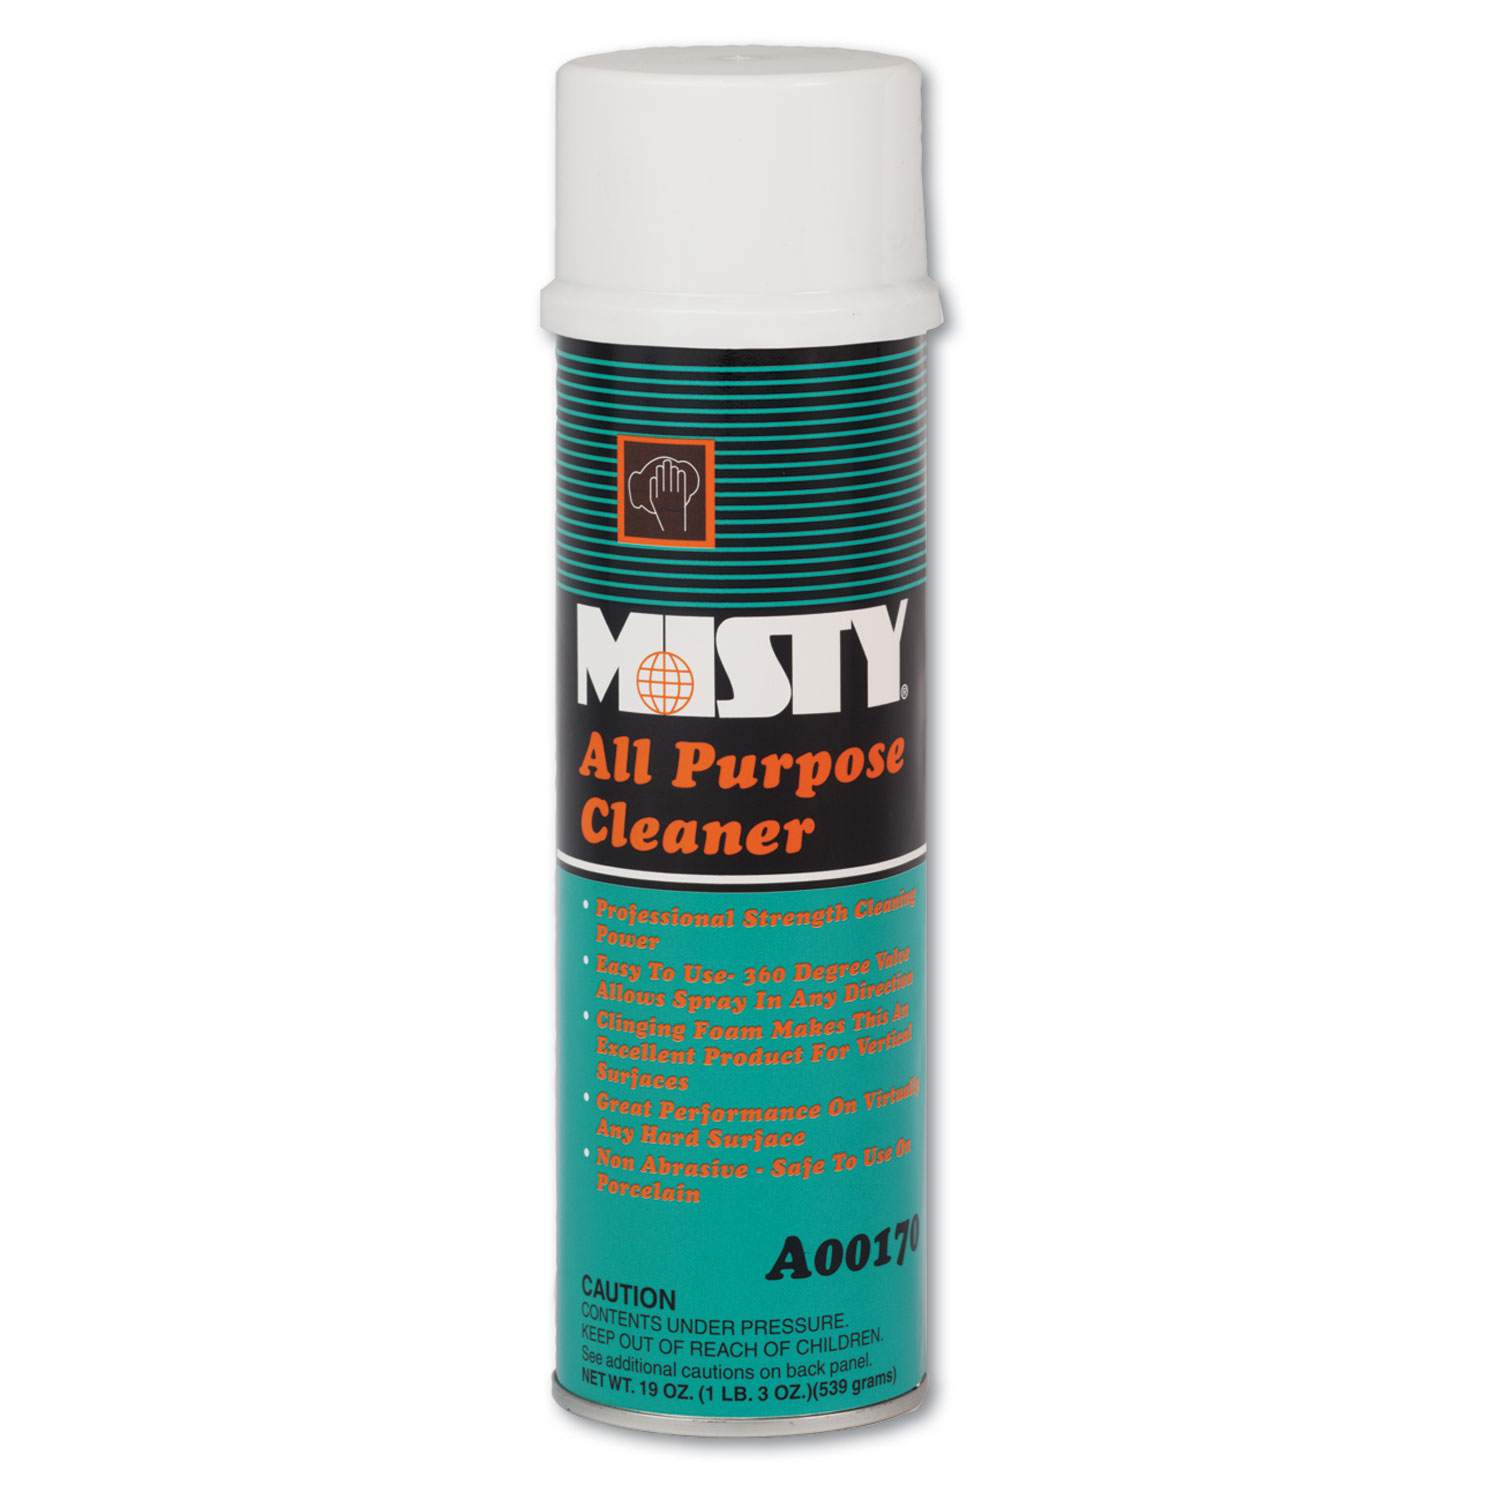  Misty 1001592 All-Purpose Cleaner, Mint Scent, 19 oz. Aerosol Can (AMR1001592) 